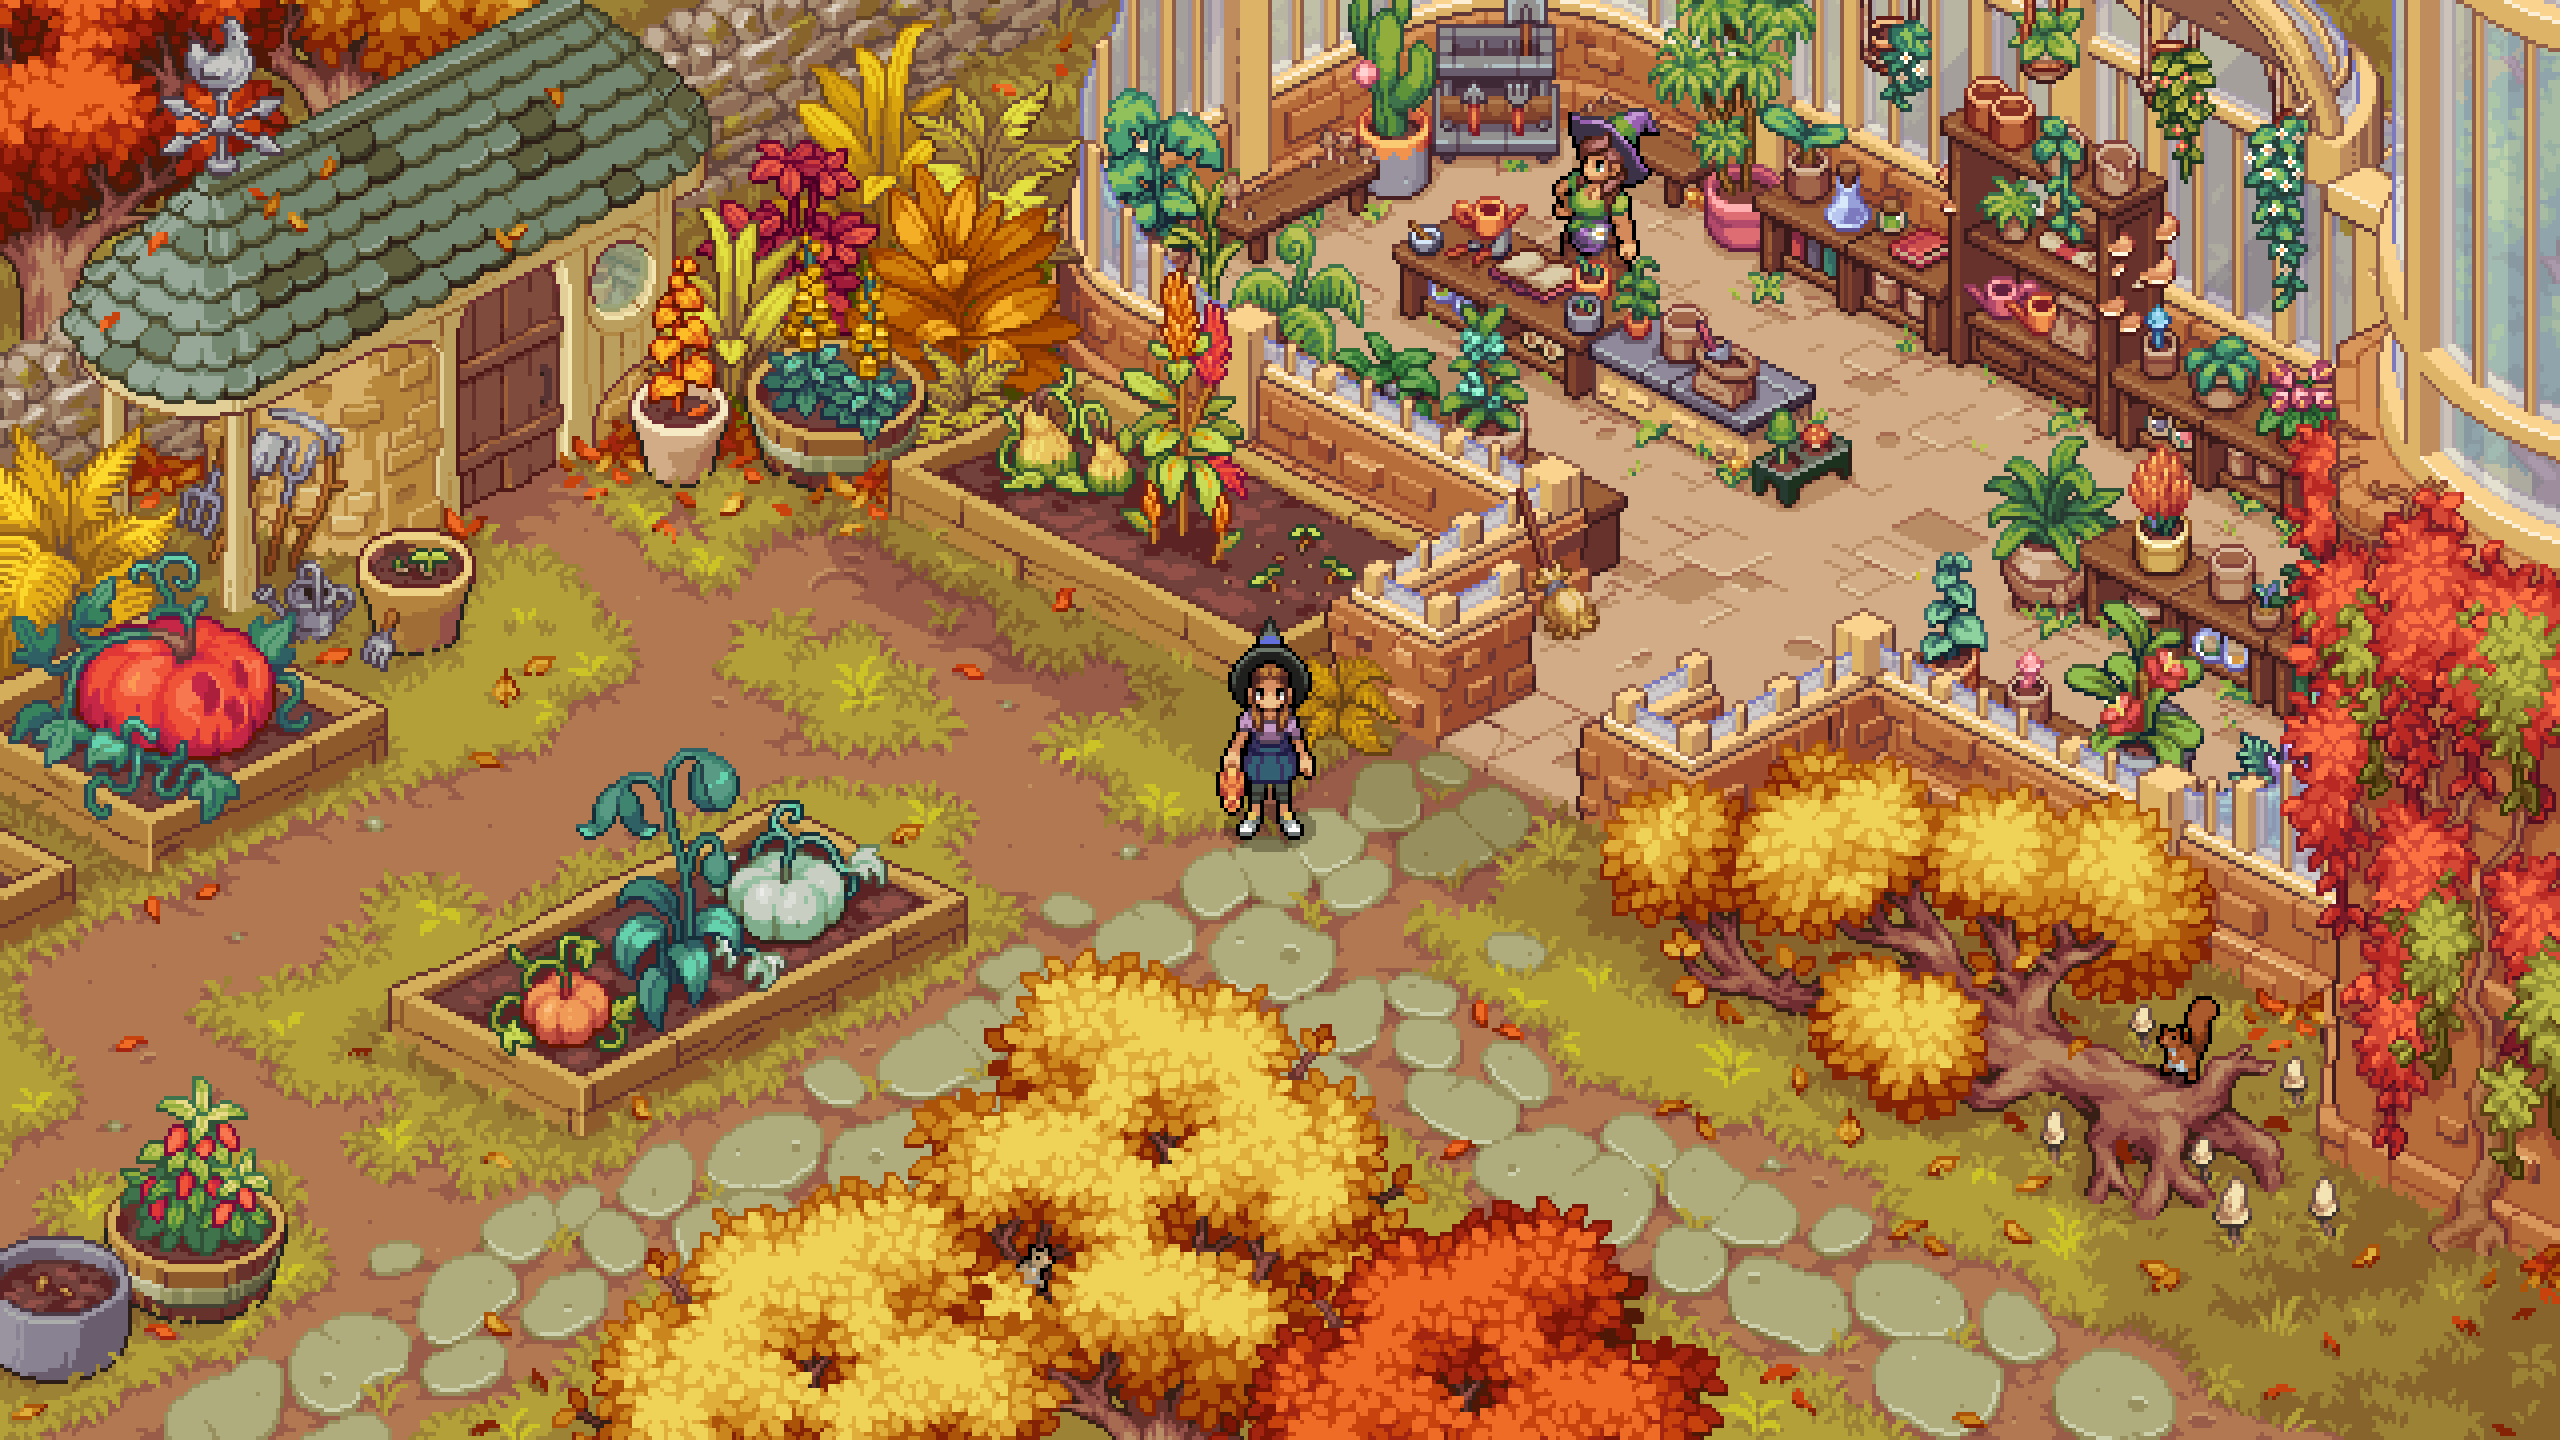 Stardew Valley launches exciting co-op beta, by Kay